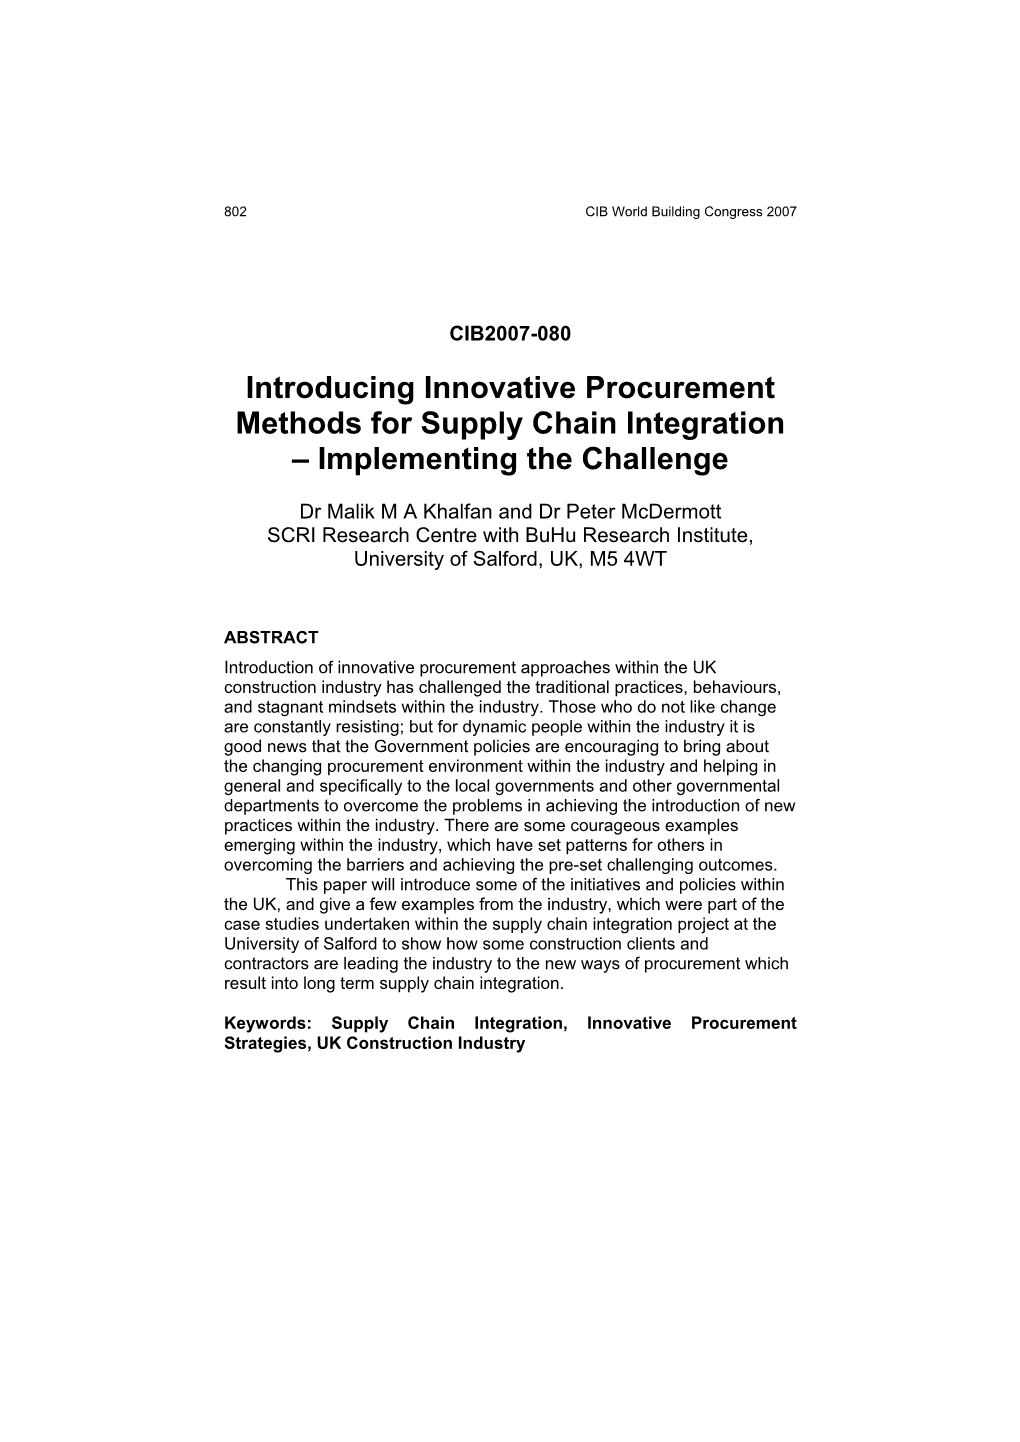 Introducing Innovative Procurement Methods for Supply Chain Integration – Implementing the Challenge